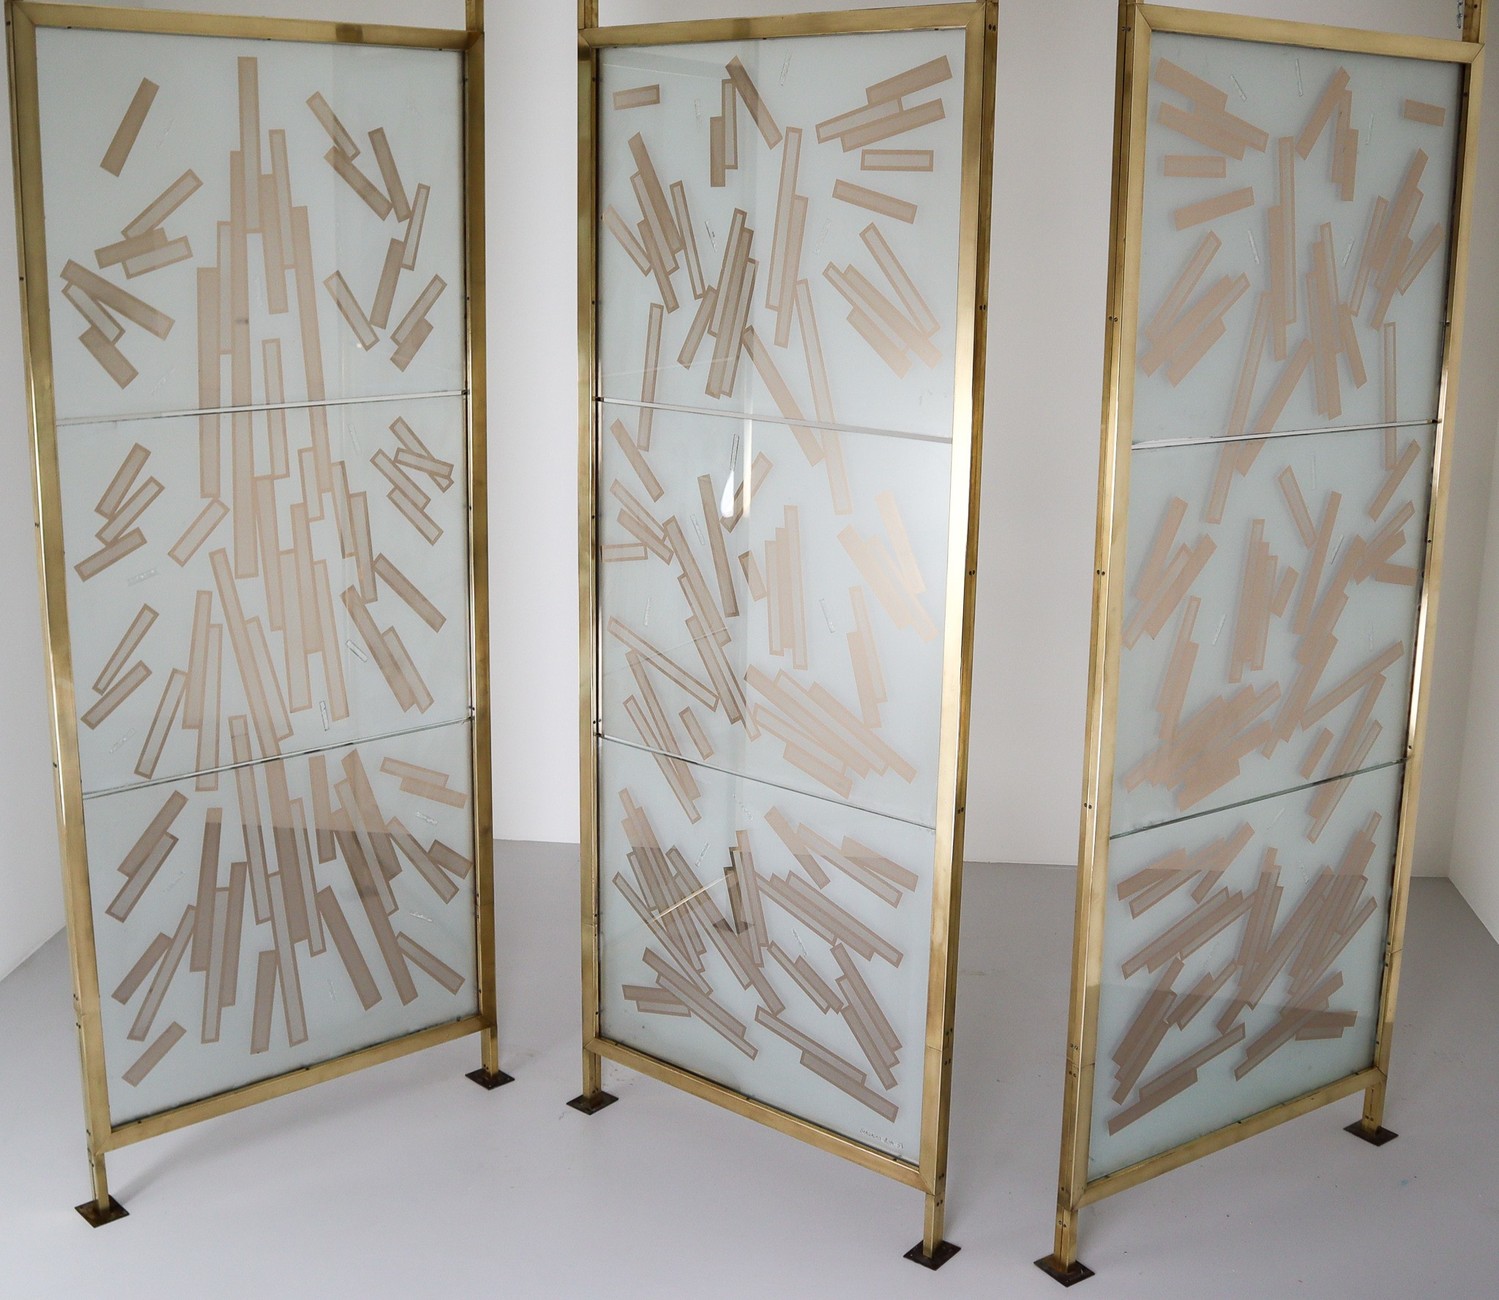  Art glass,Brass Brass Room Screen/Room Divider In Bohemian Etched Art Glass, Praque Mid-20th century